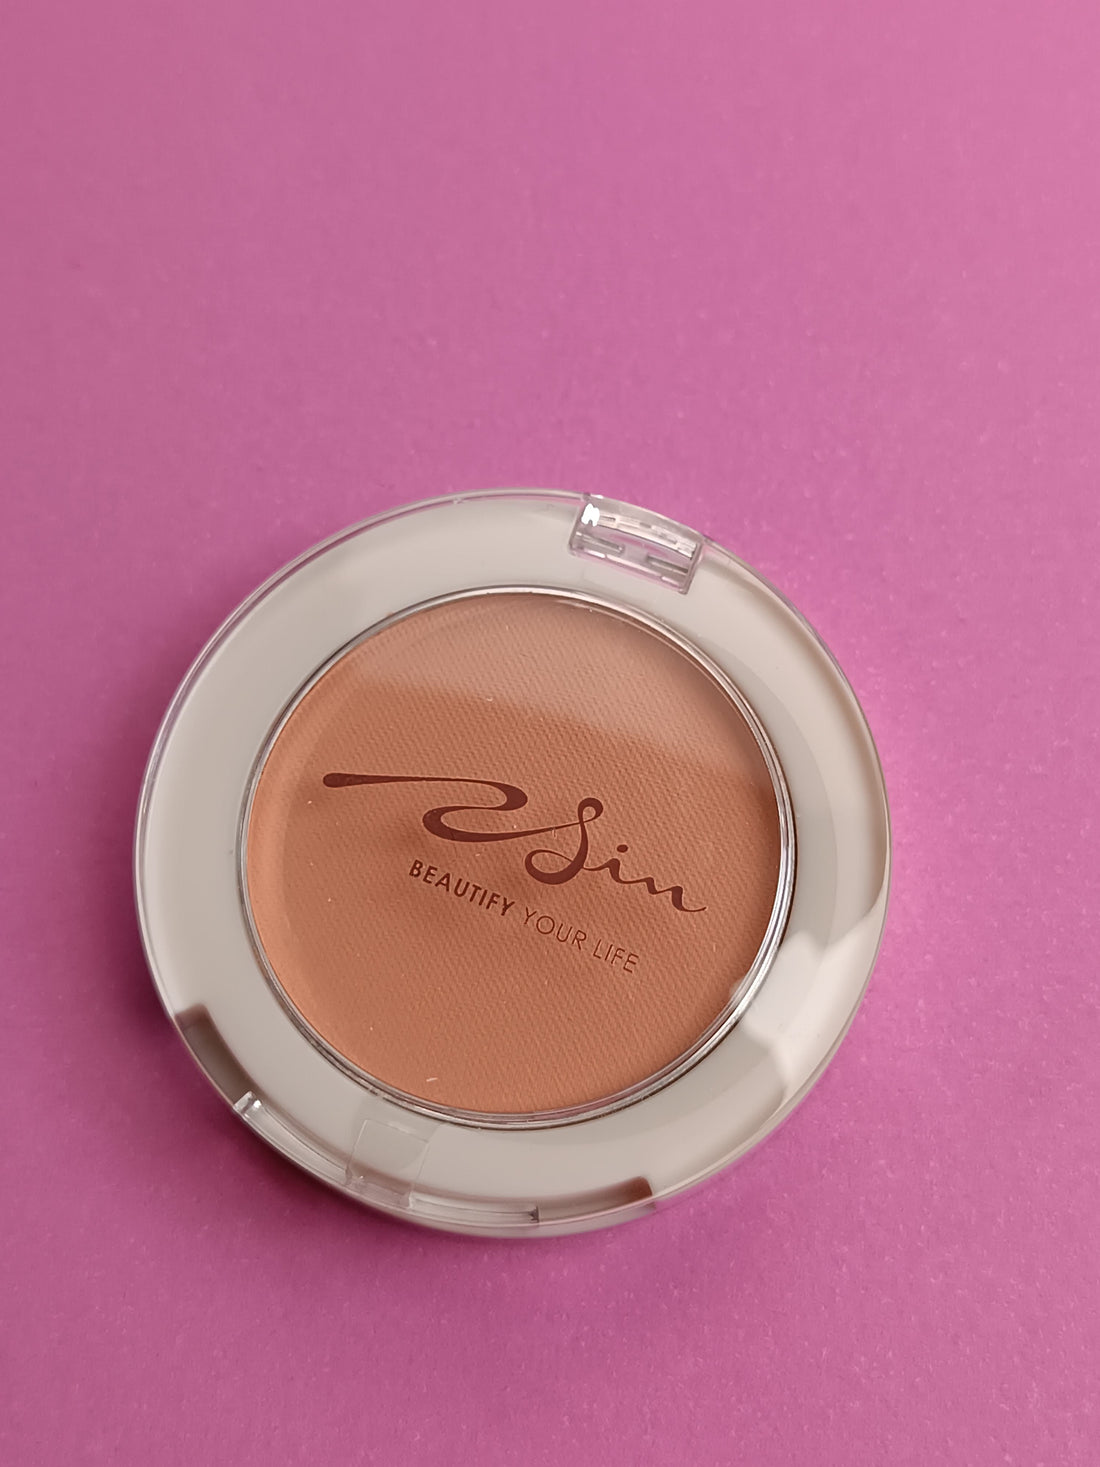 Beature Beautify your life Flower Blush